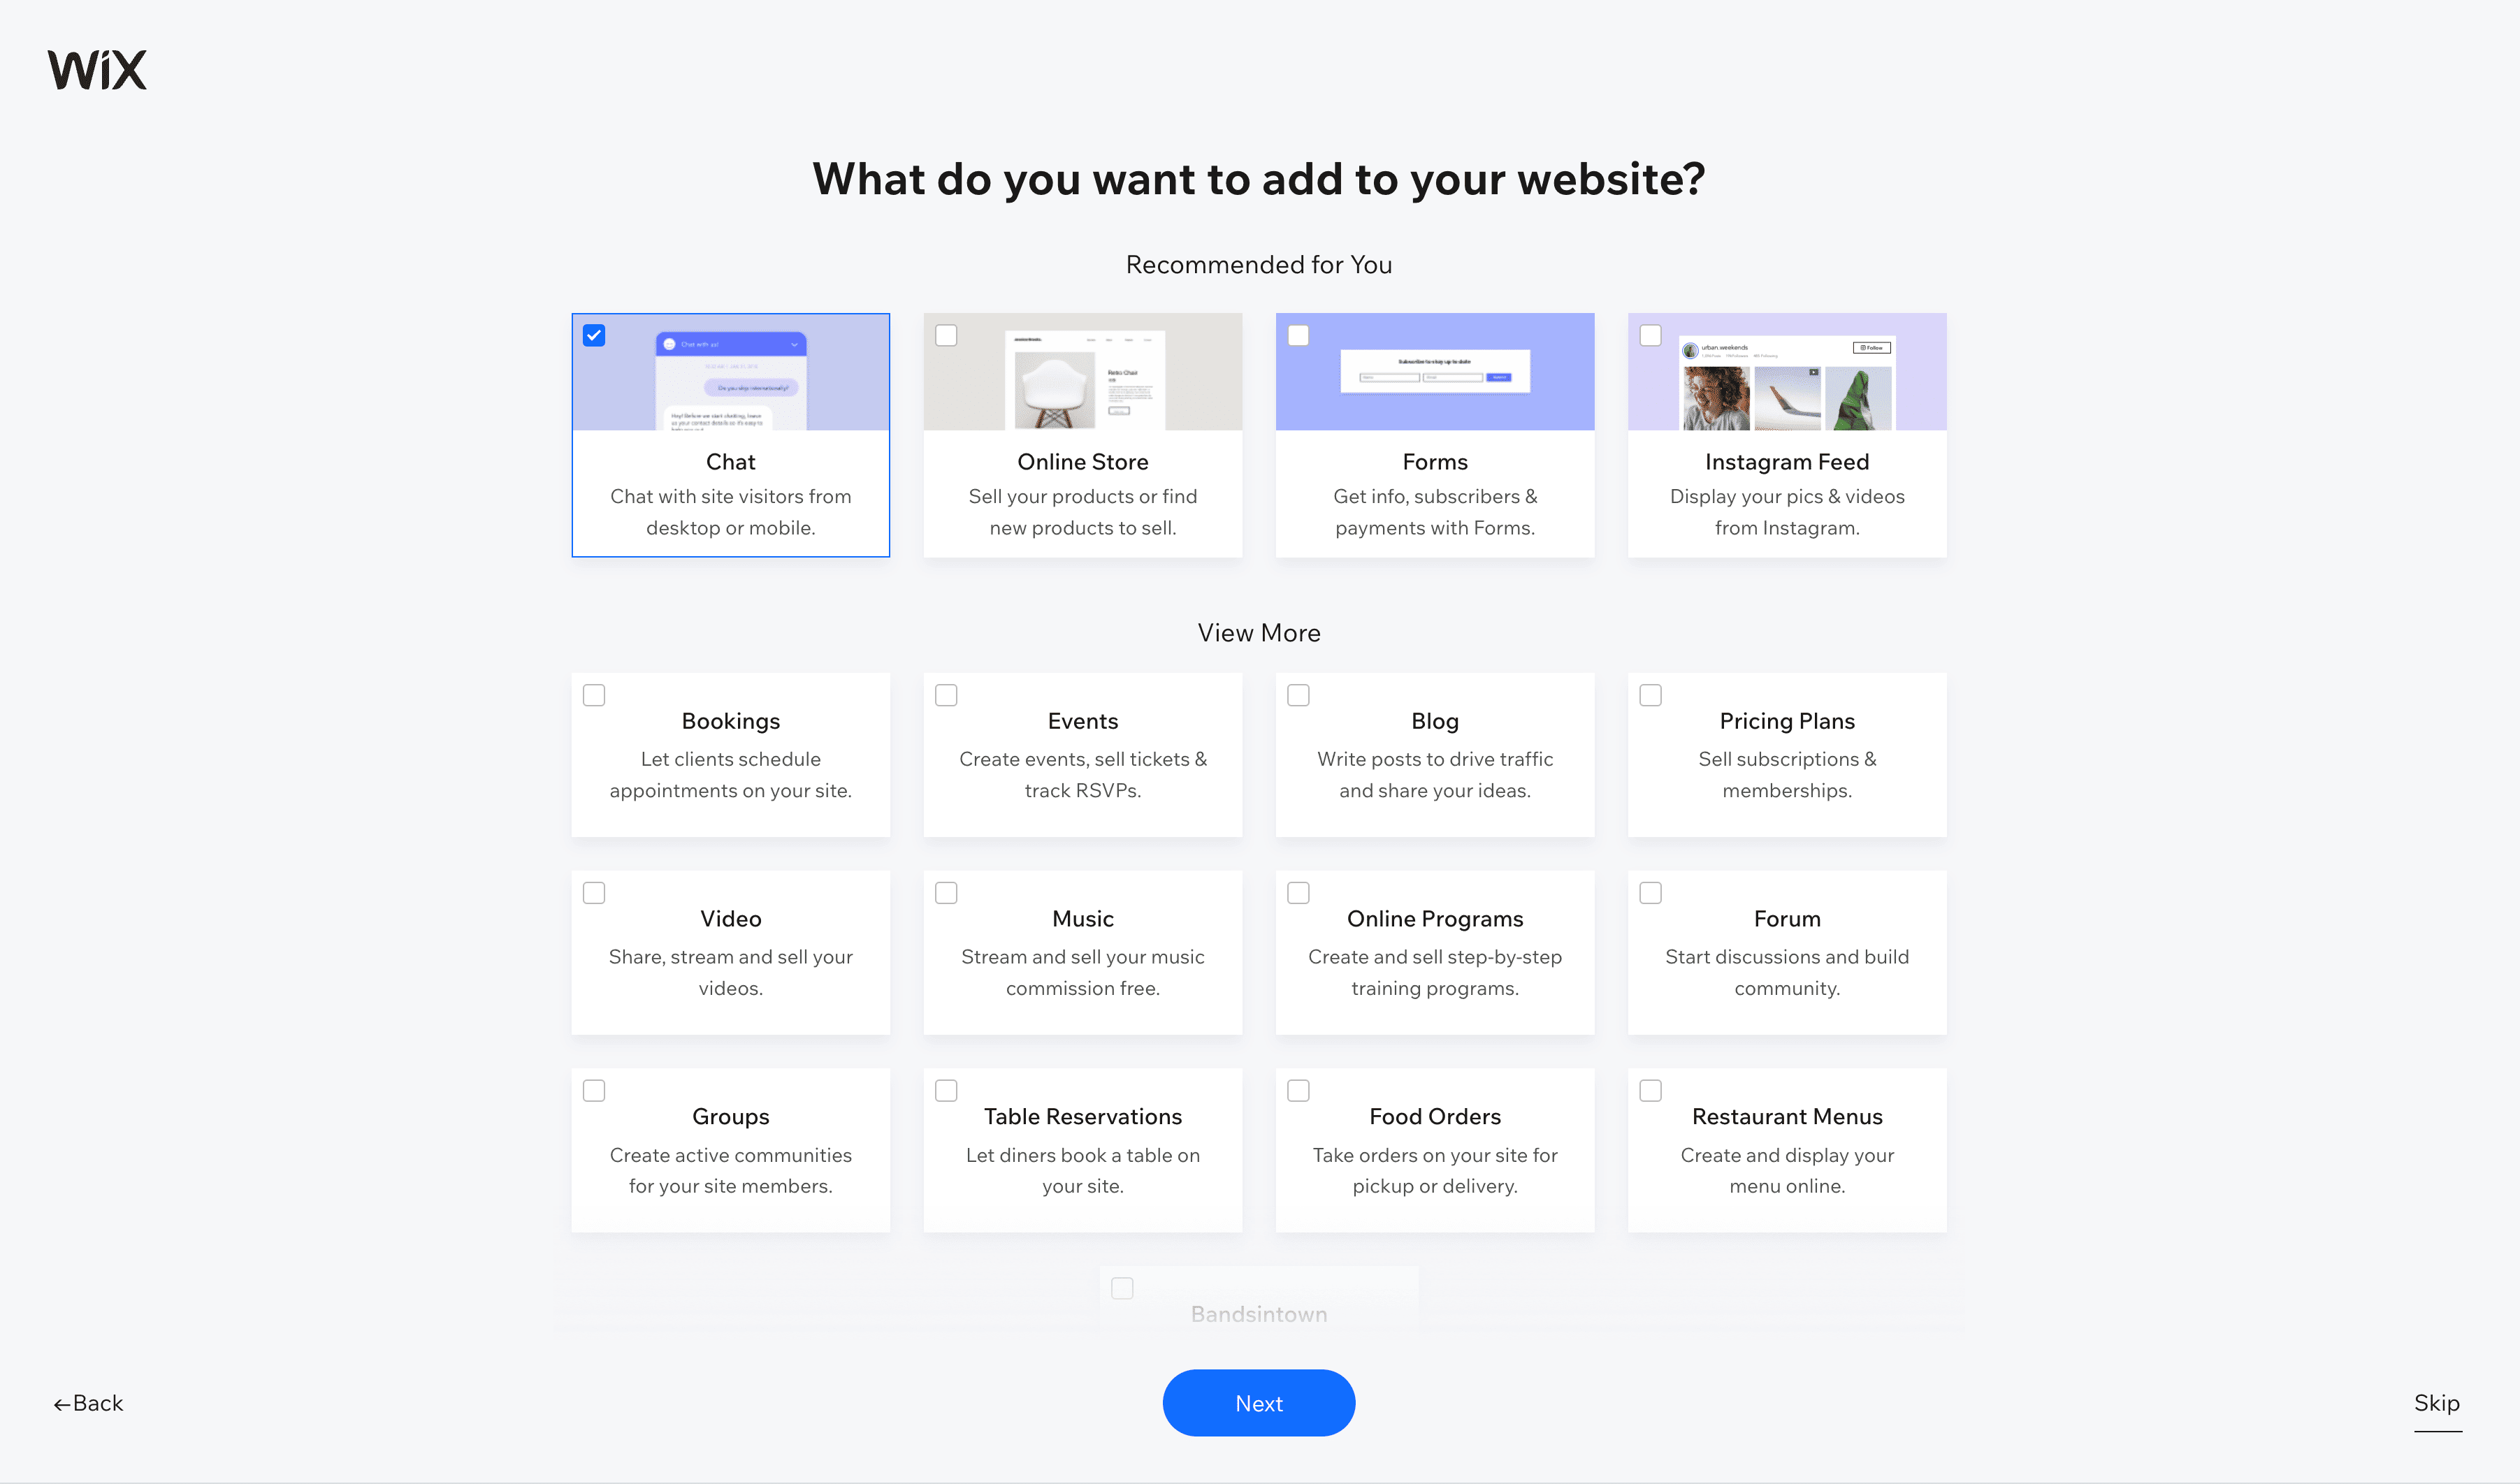 Wix asking what type of features you'd like on your site, such as chat and forms